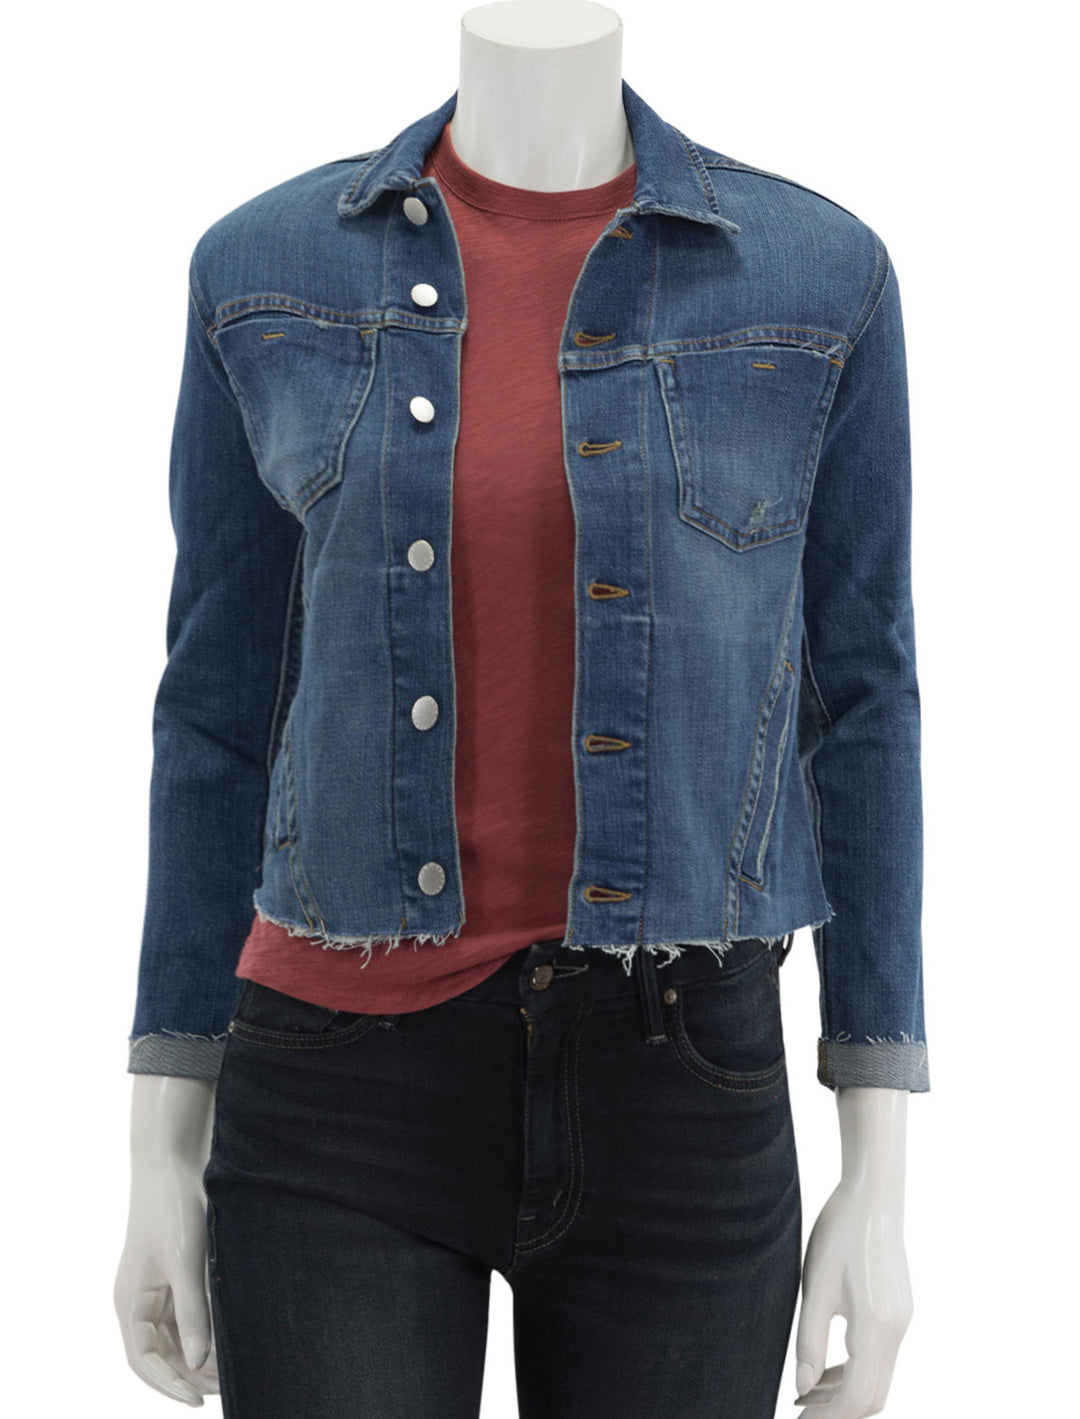 Front view of L'agence's janelle slim raw jacket in authentique, unbuttoned.